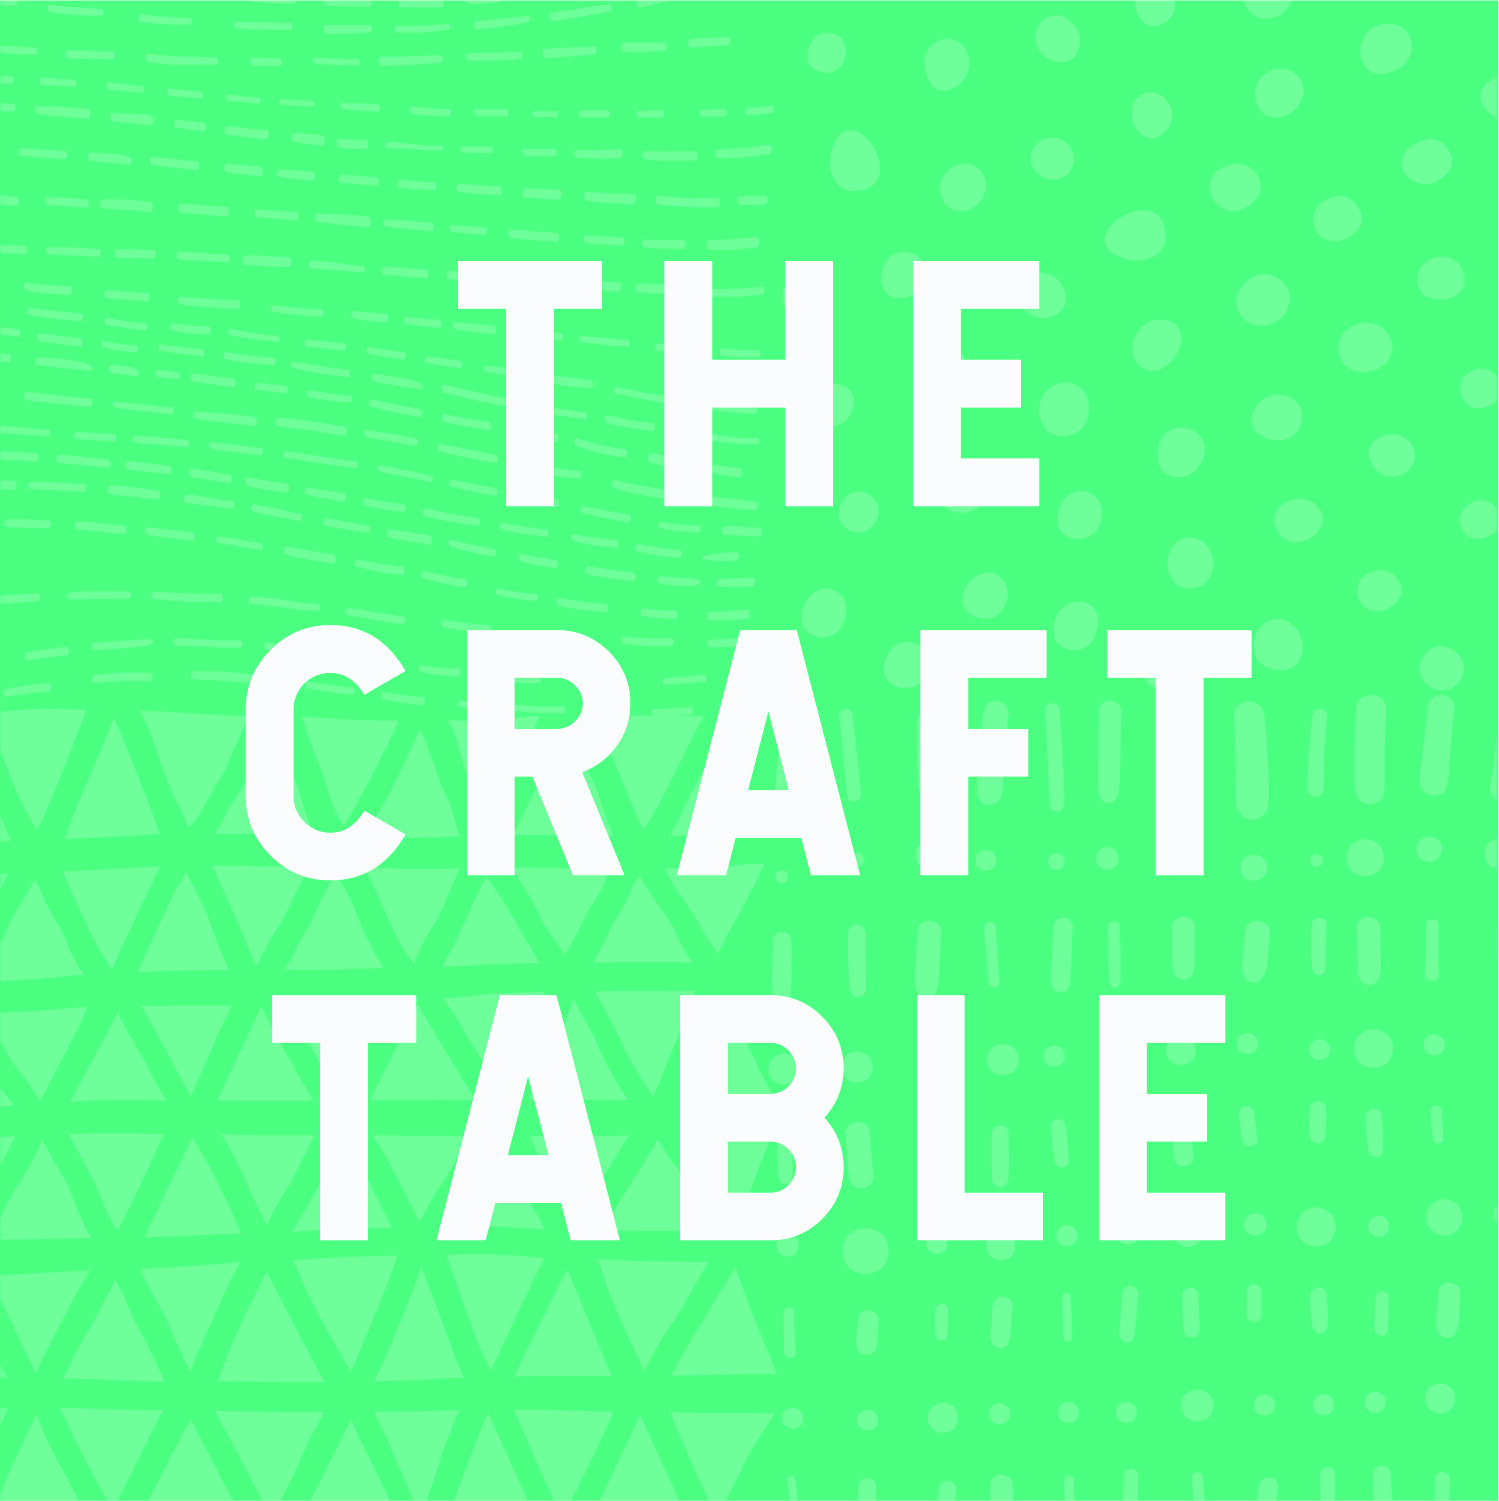 Quilt Recipes — The Craft Table